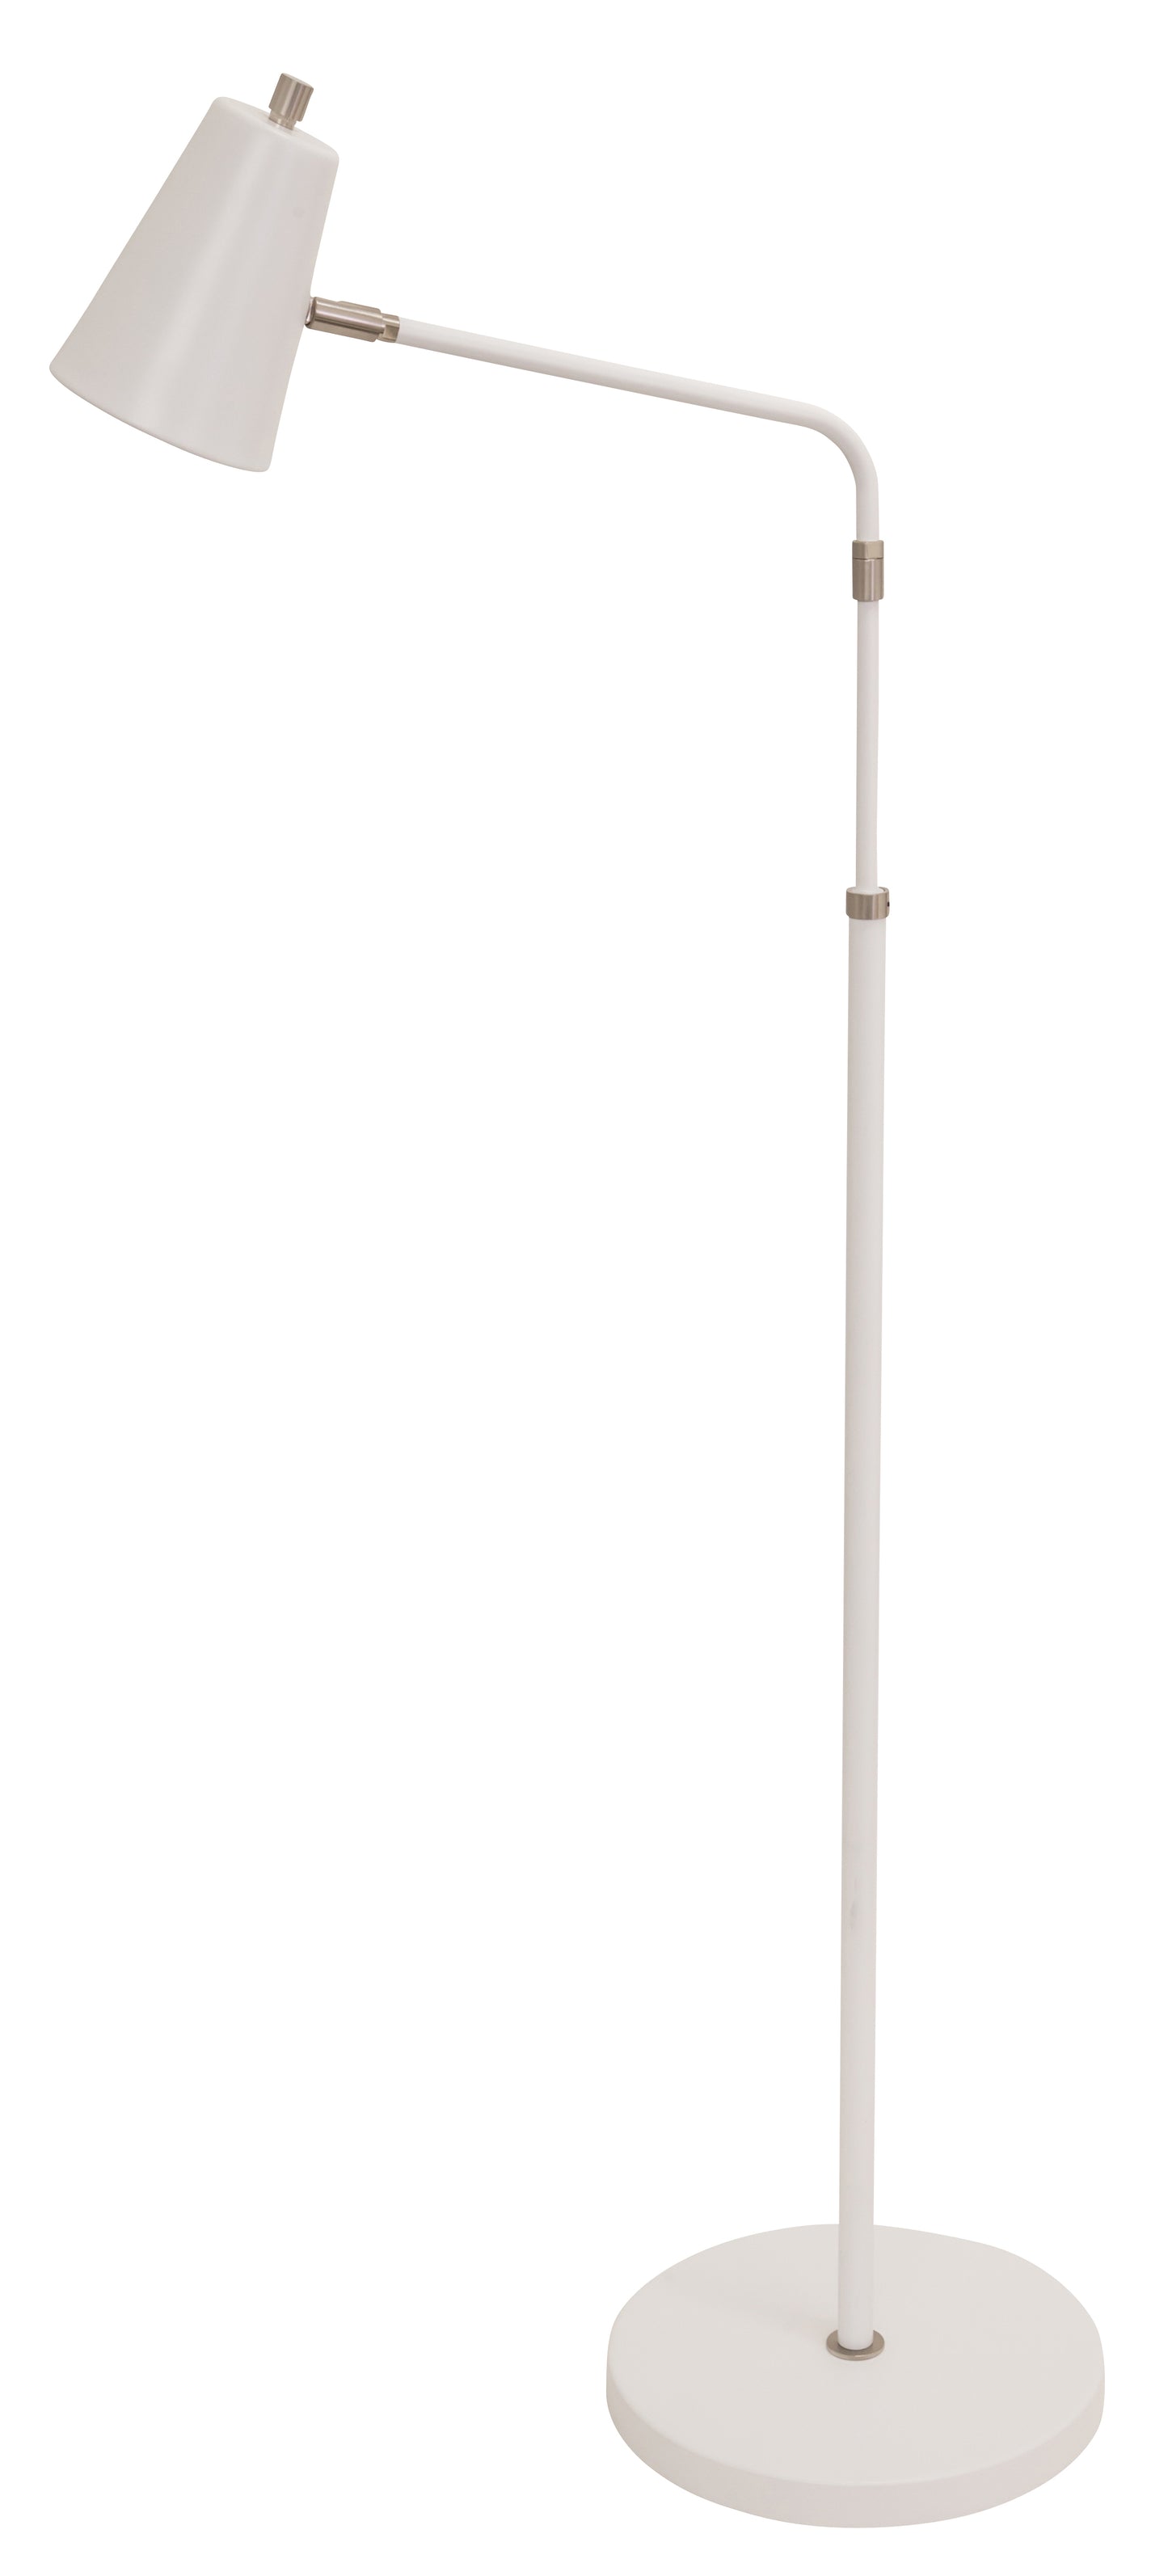 House of Troy Kirby LED adjustable floor lamp in white with satin nickel accents K100-WT